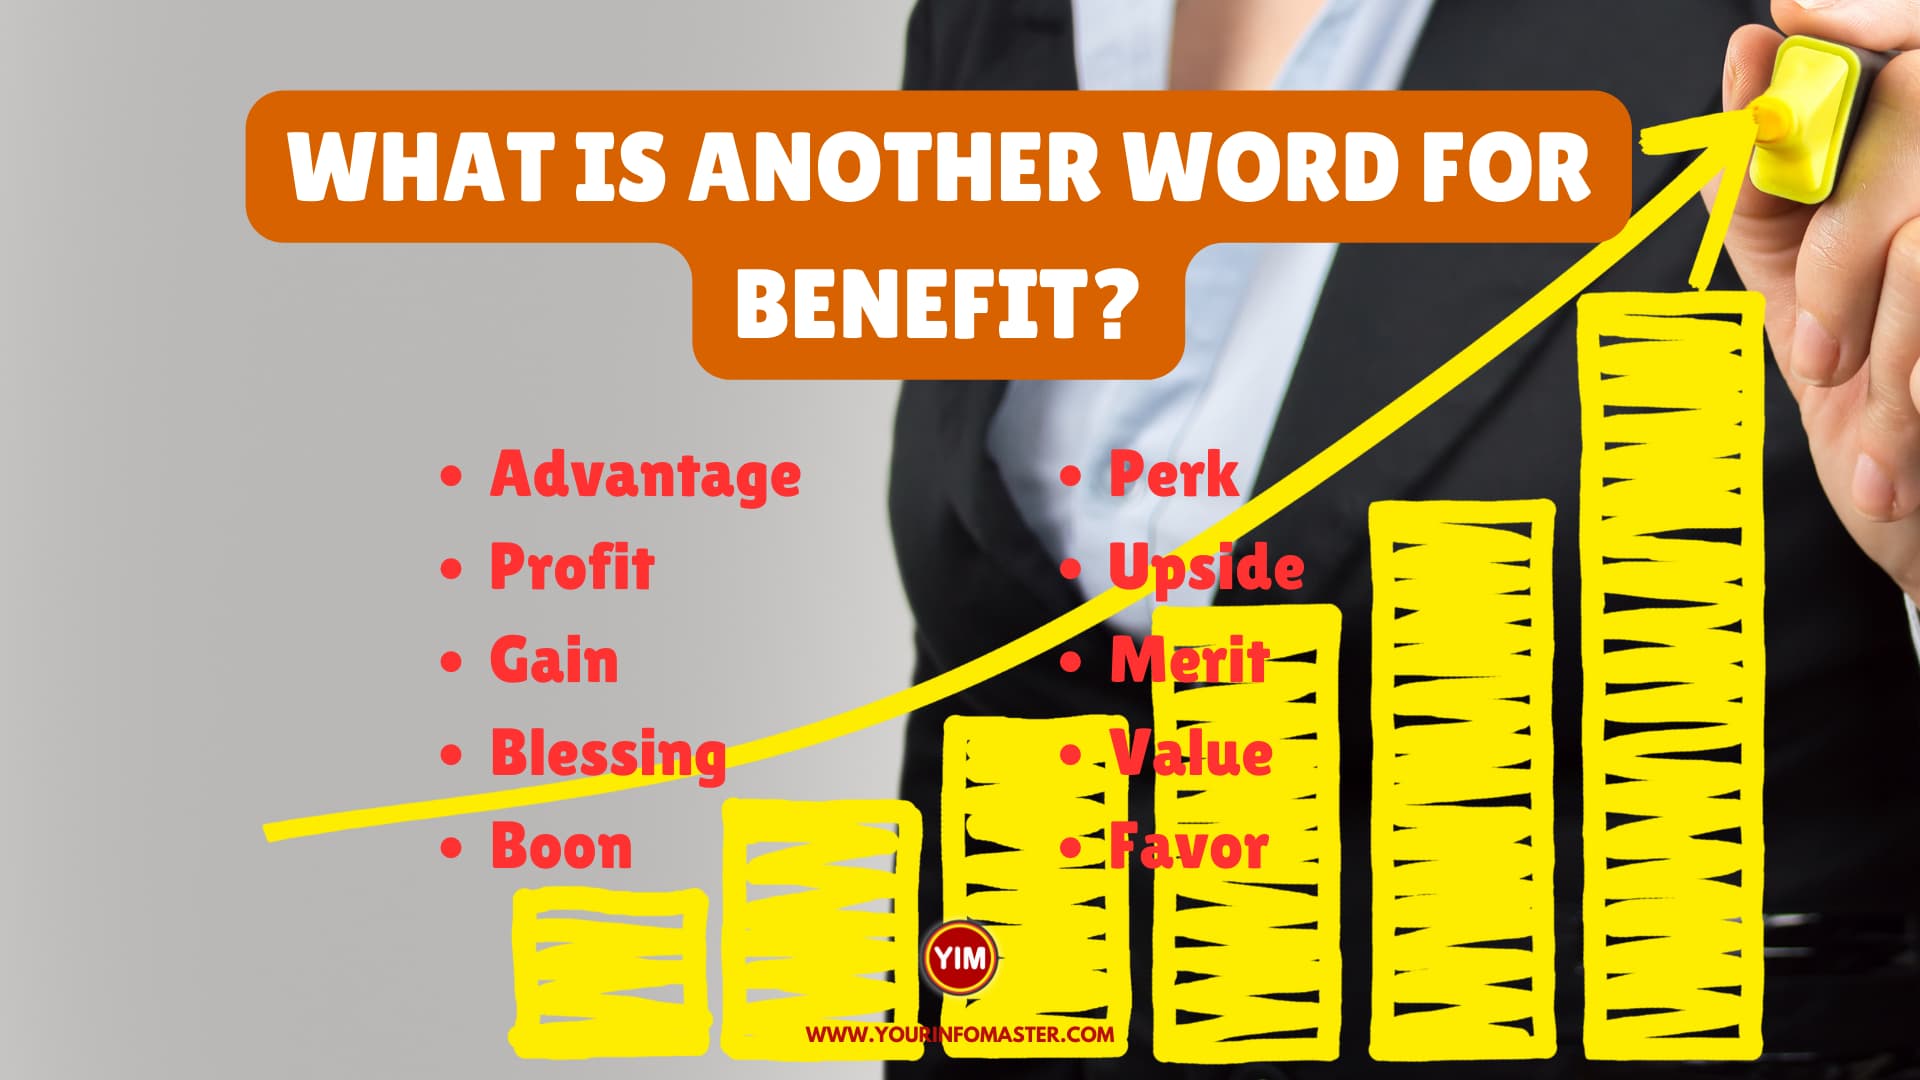 What is another word for Benefit